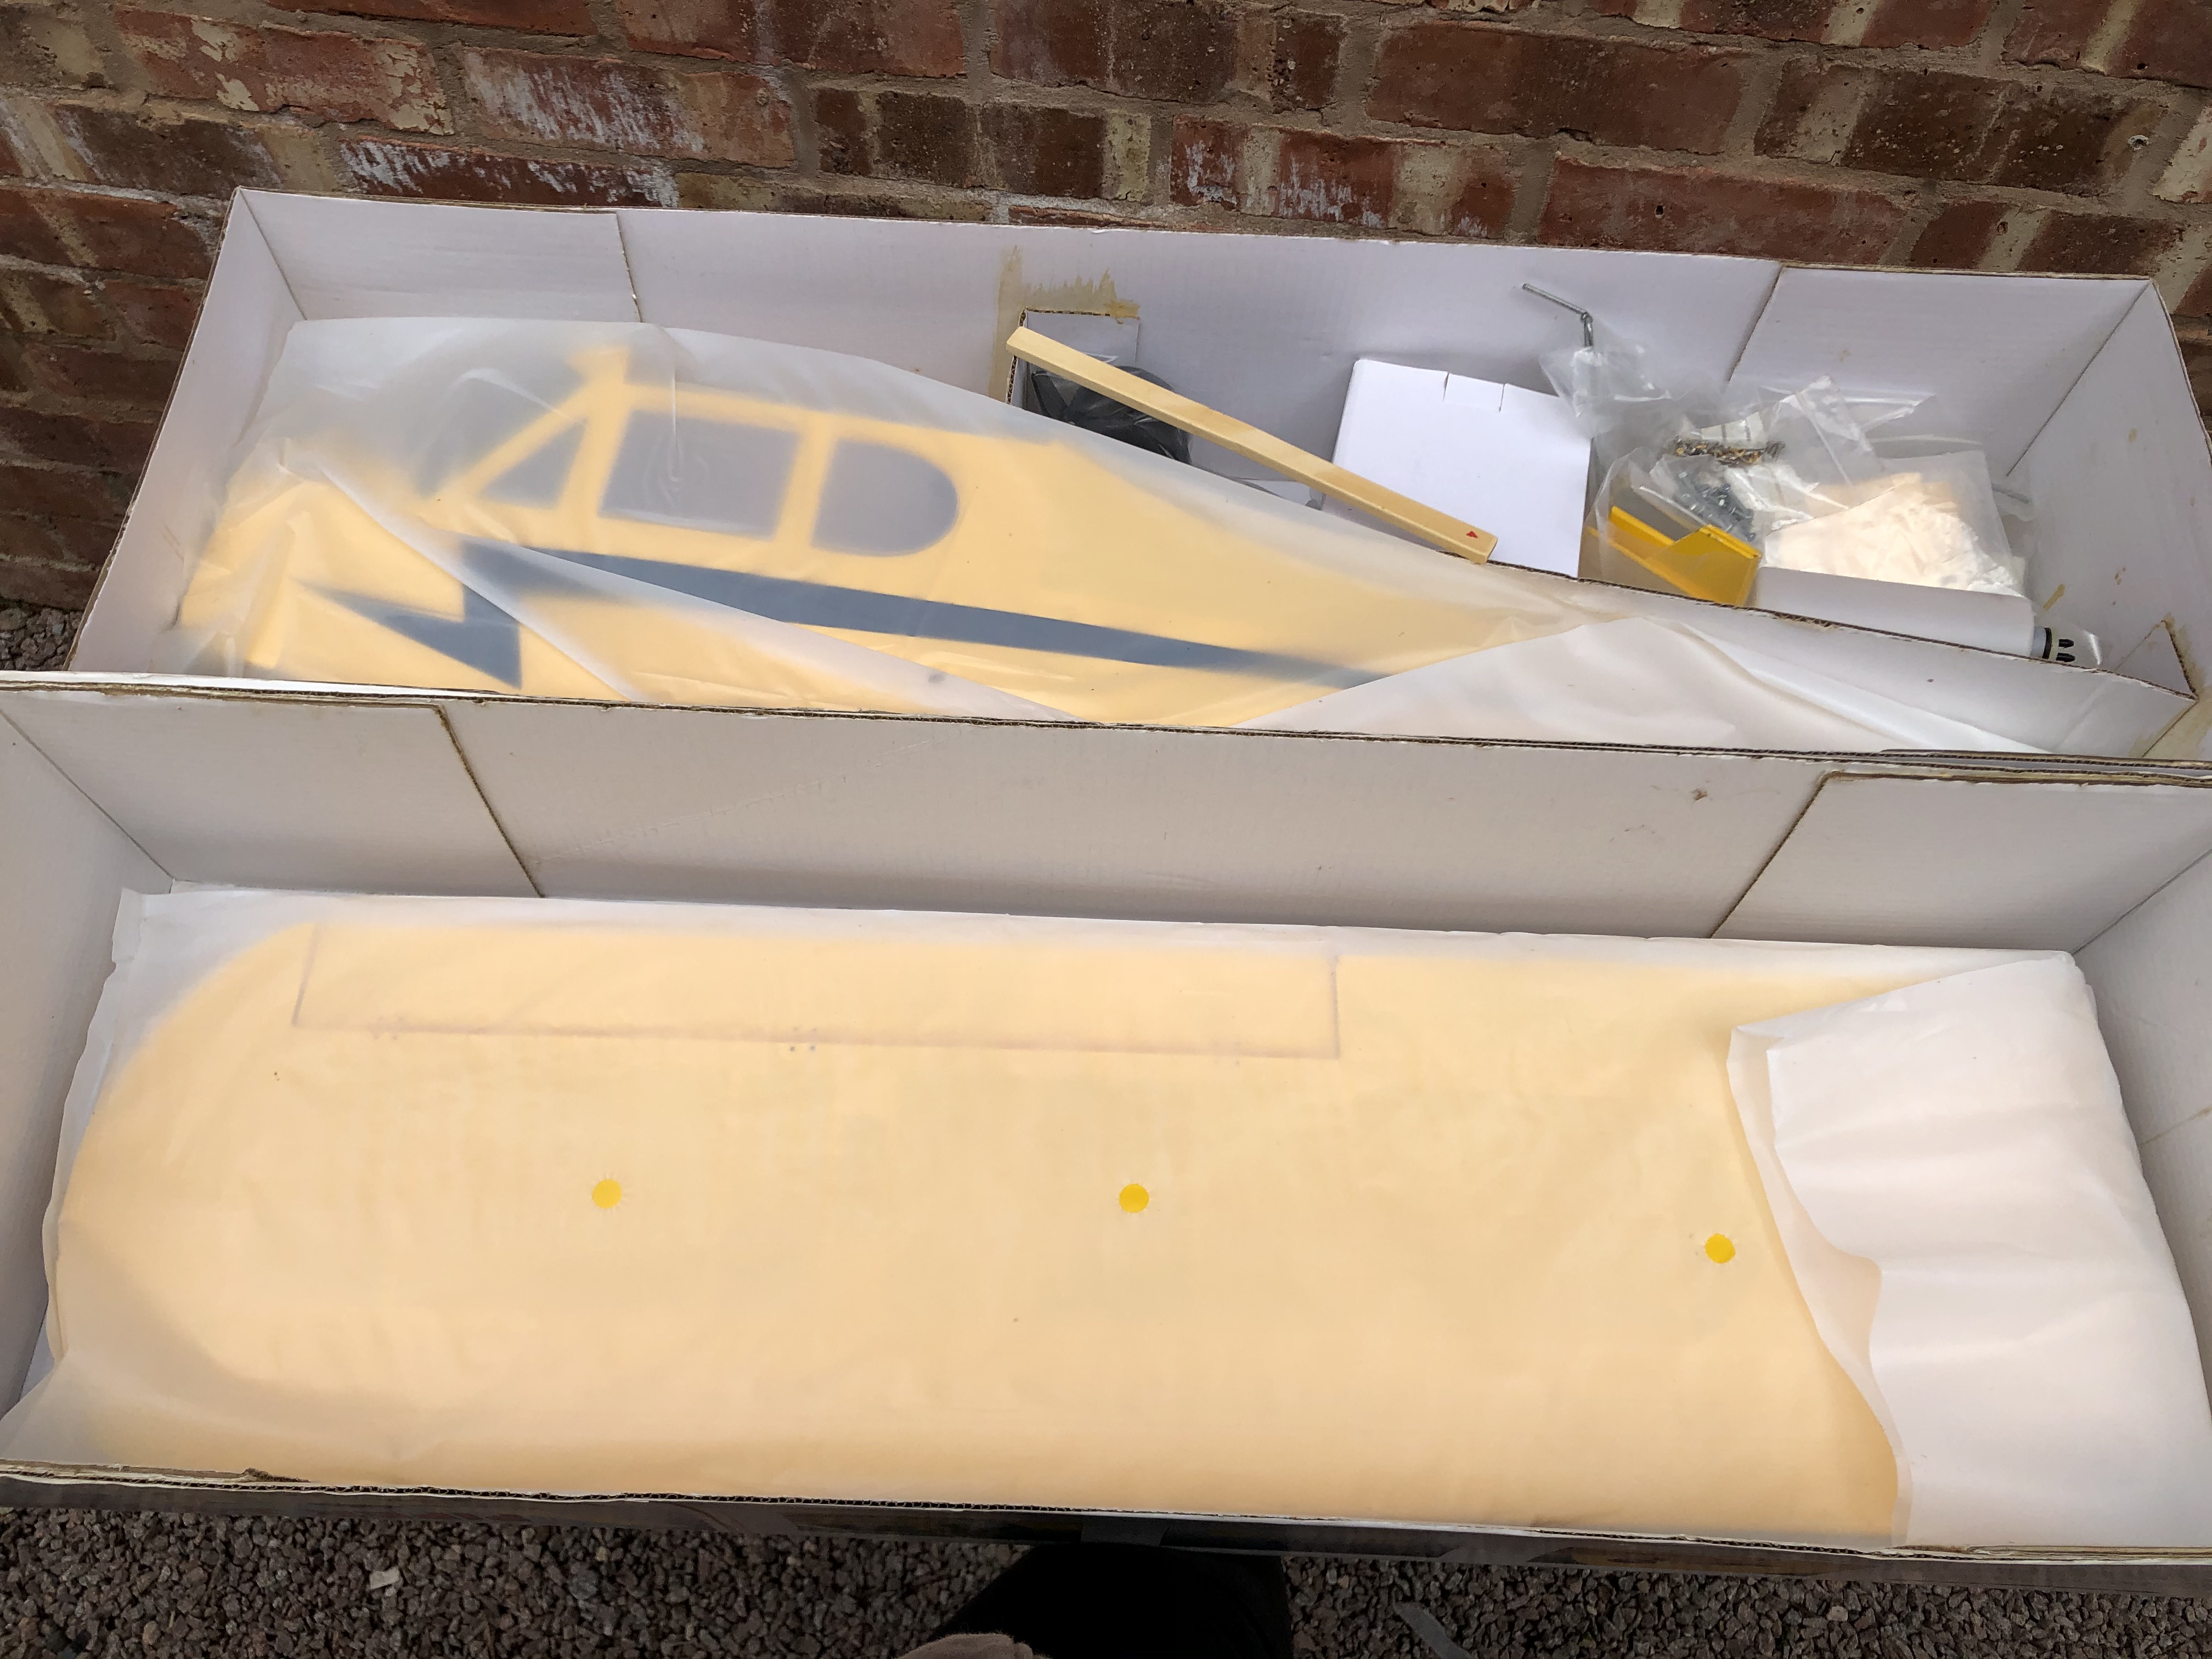 BOXED HYPER J3 CUB SEMI SCALE ALMOST READY TO FLY MODEL KIT, - Image 6 of 6